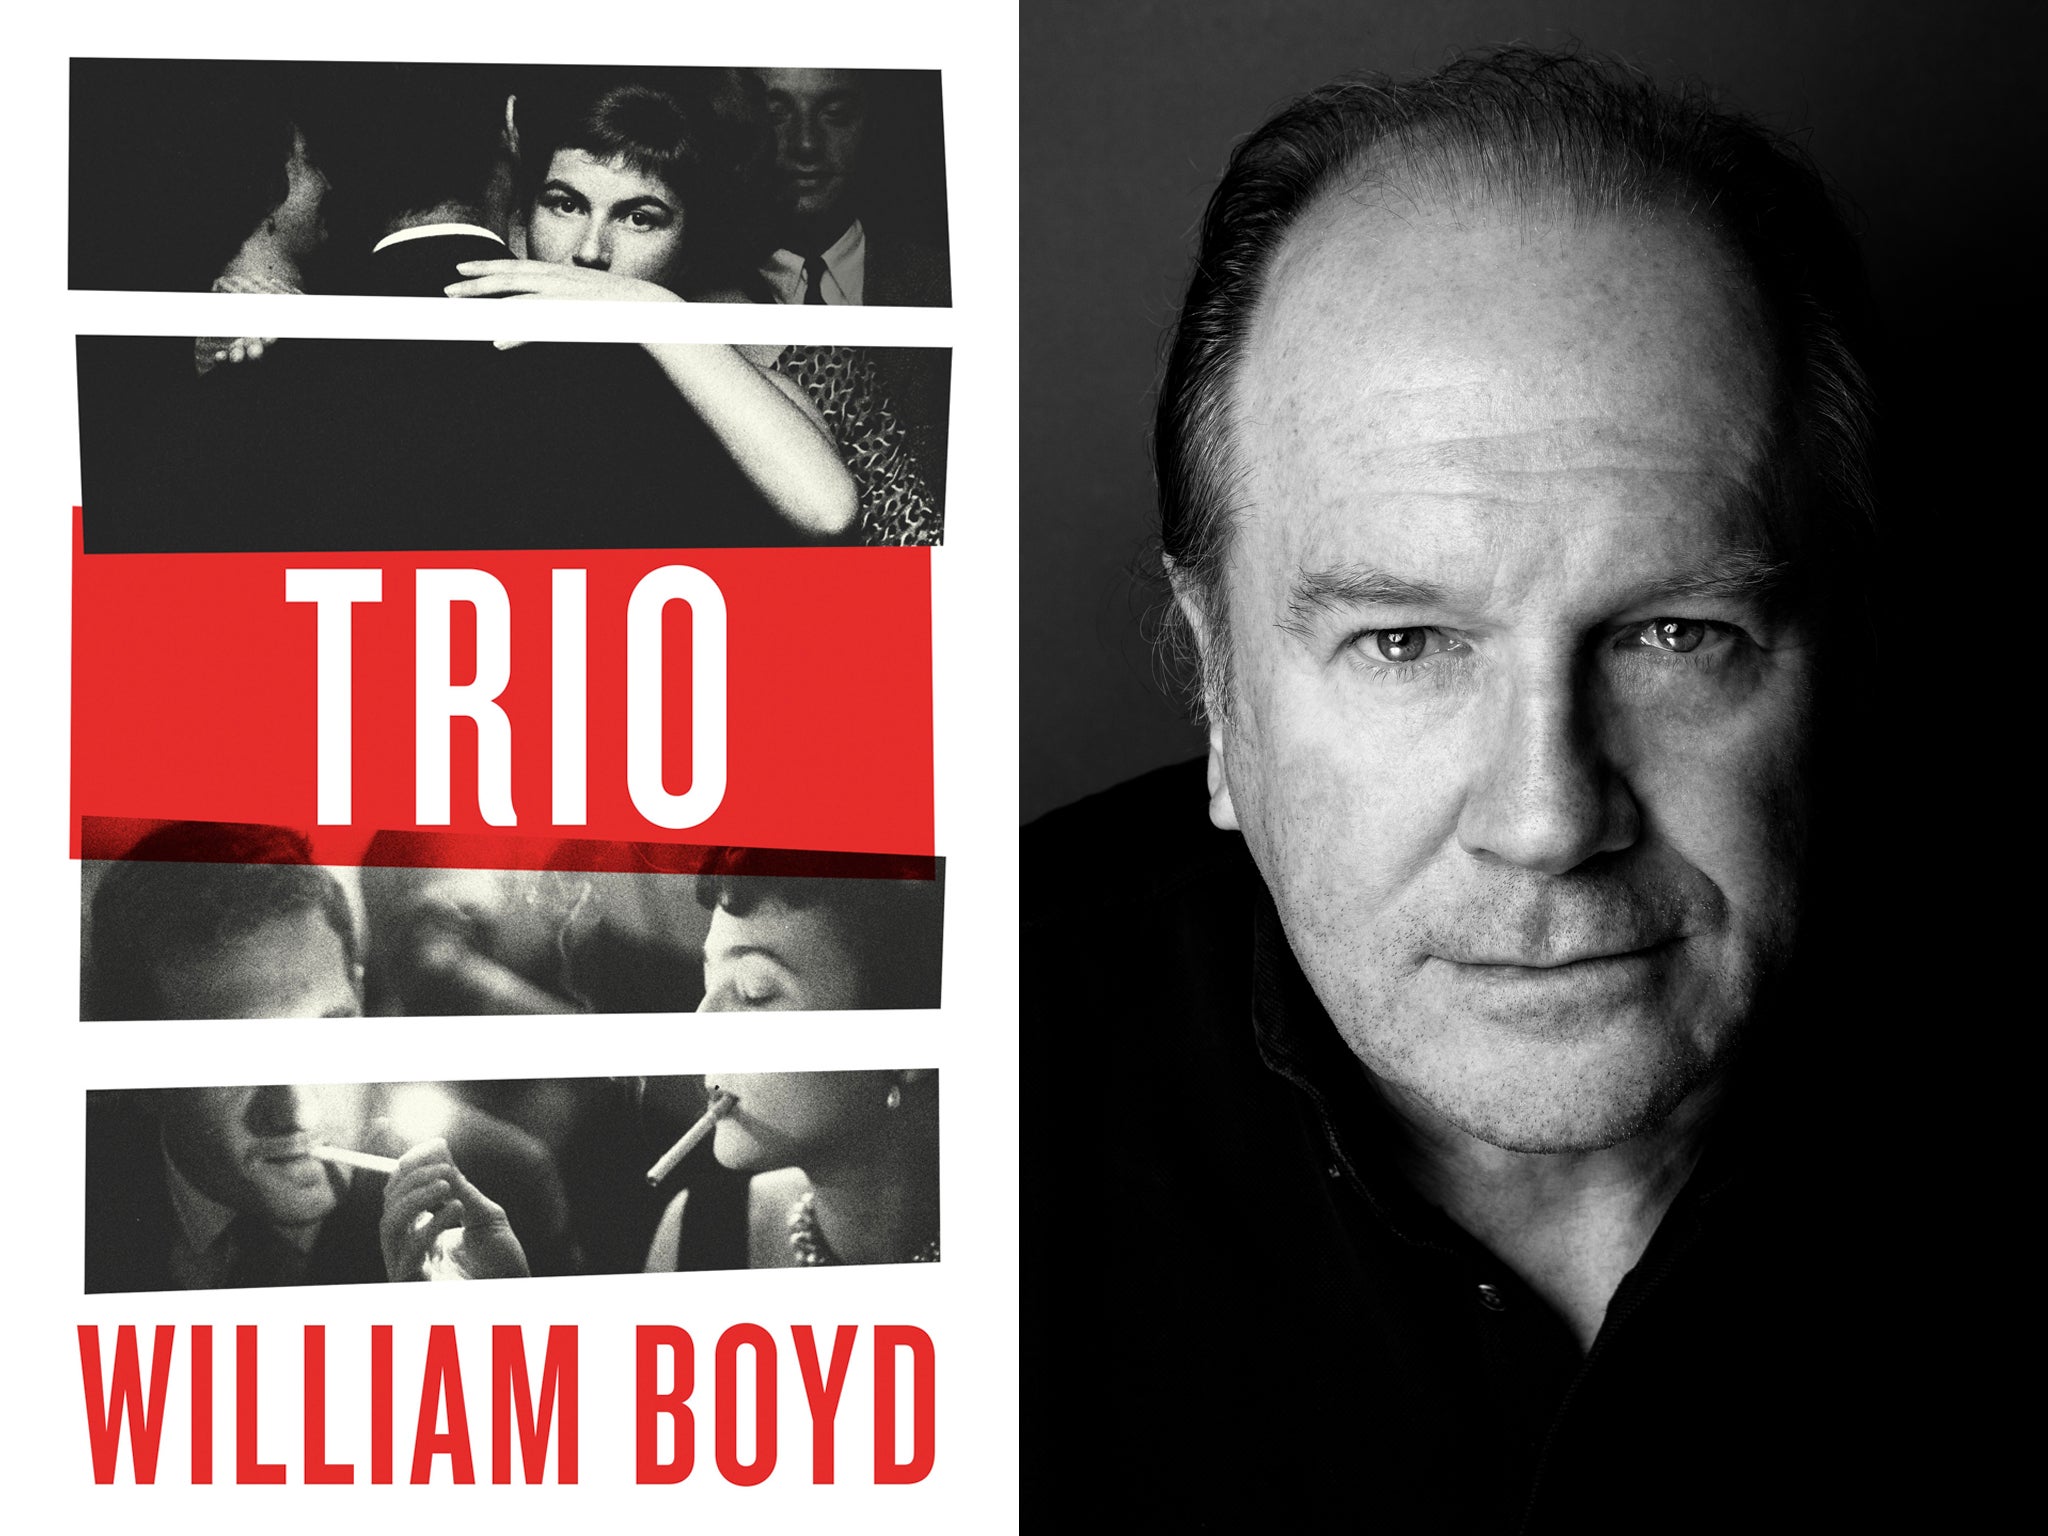 William Boyd’蝉 latest novel ‘Trio’ is set in Brighton and Paris amidst the global political and social turbulence of 1968